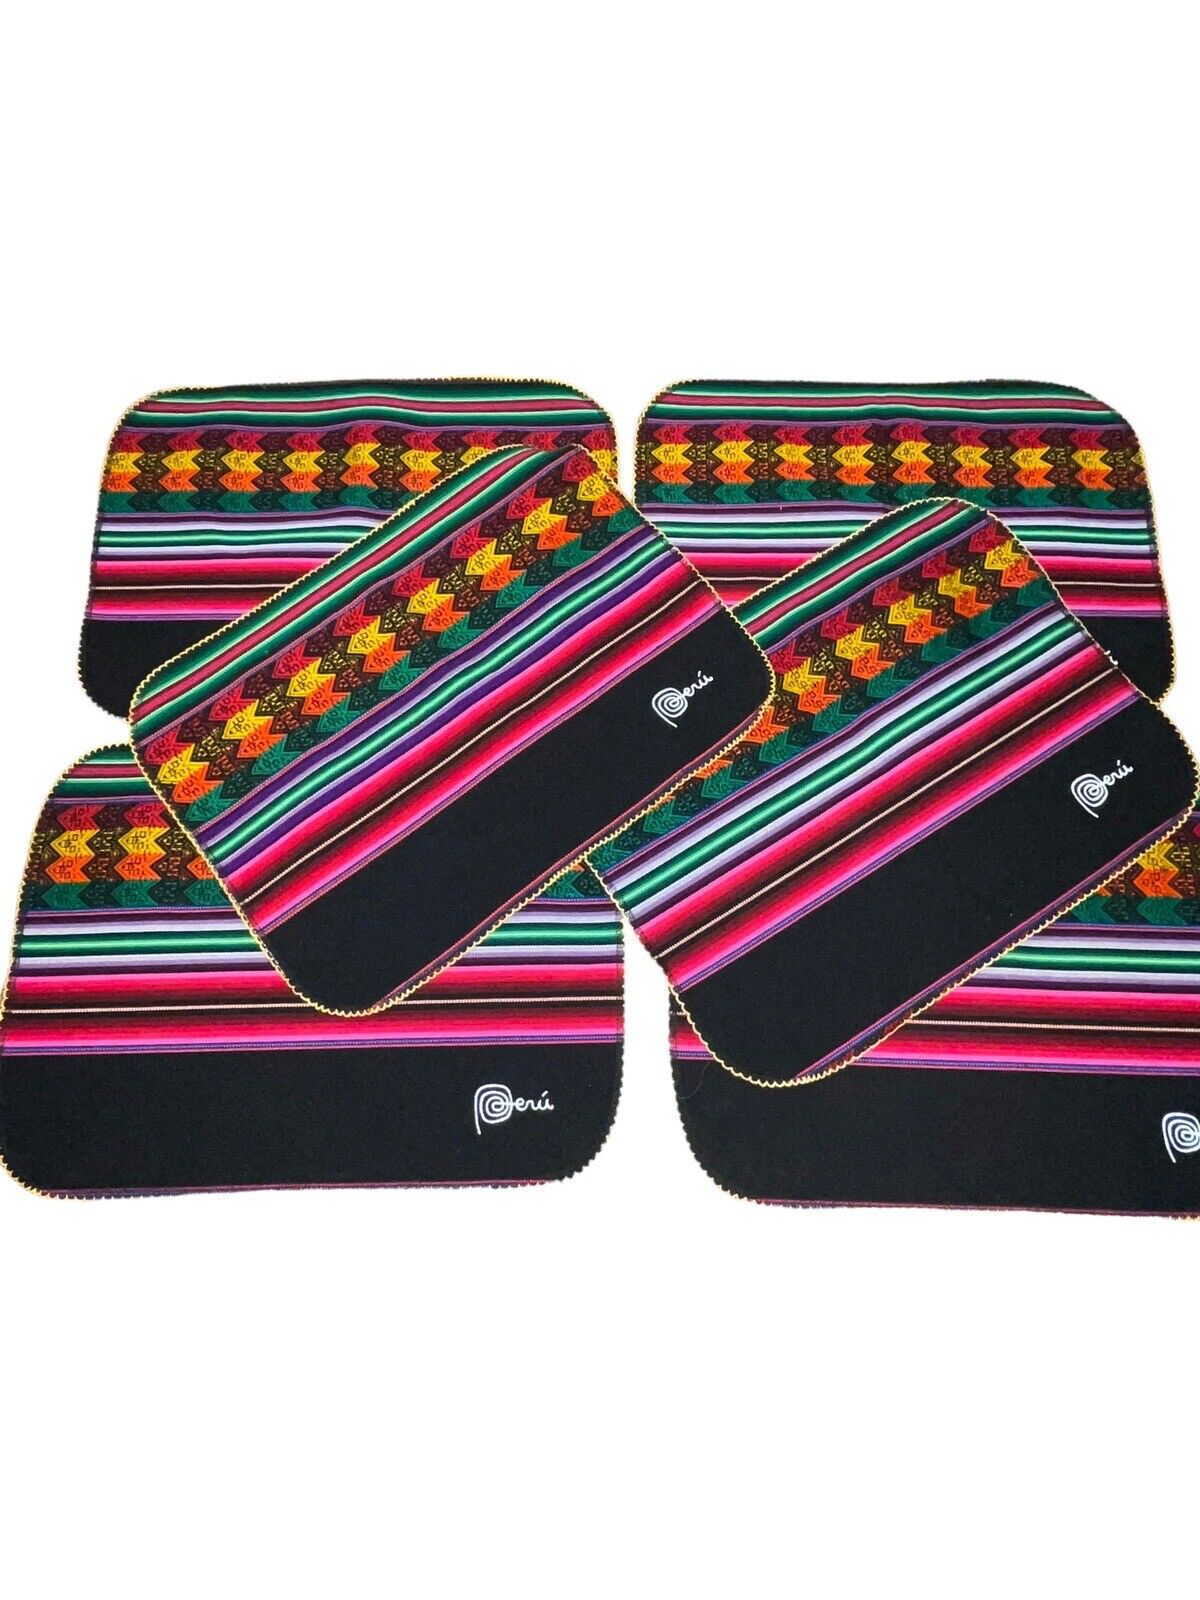 Set of 6 Authentic Peruvian Artesian Woven Placemats Colorful